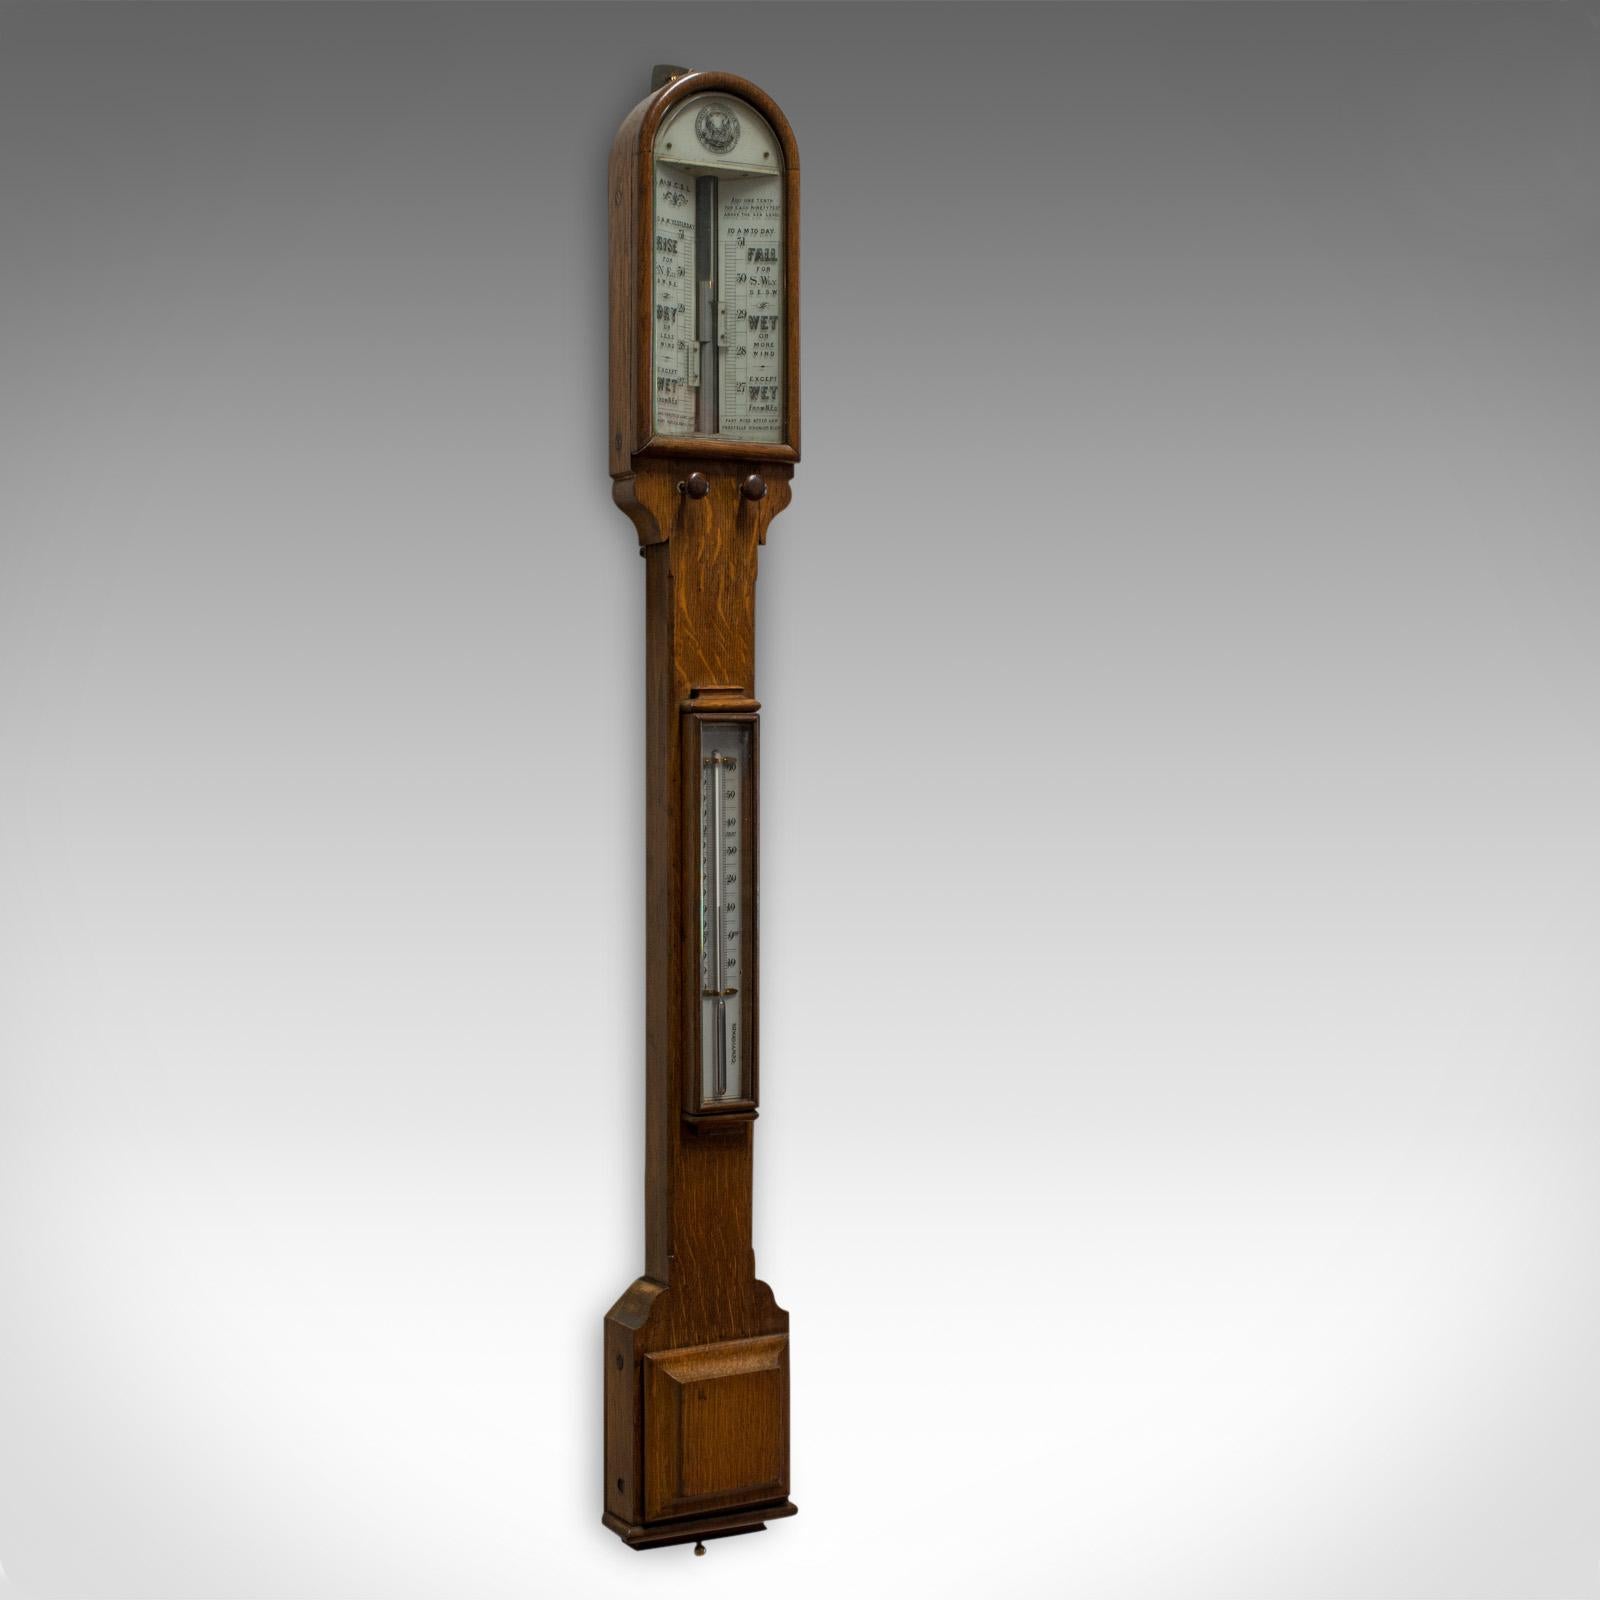 This is an antique stick barometer. An English, oak twin vernier barometer from the Army and Navy Co-operative Society and dating to the Victorian period, circa 1900.

Select oak displays rich caramel hues and a desirable aged patina
Original